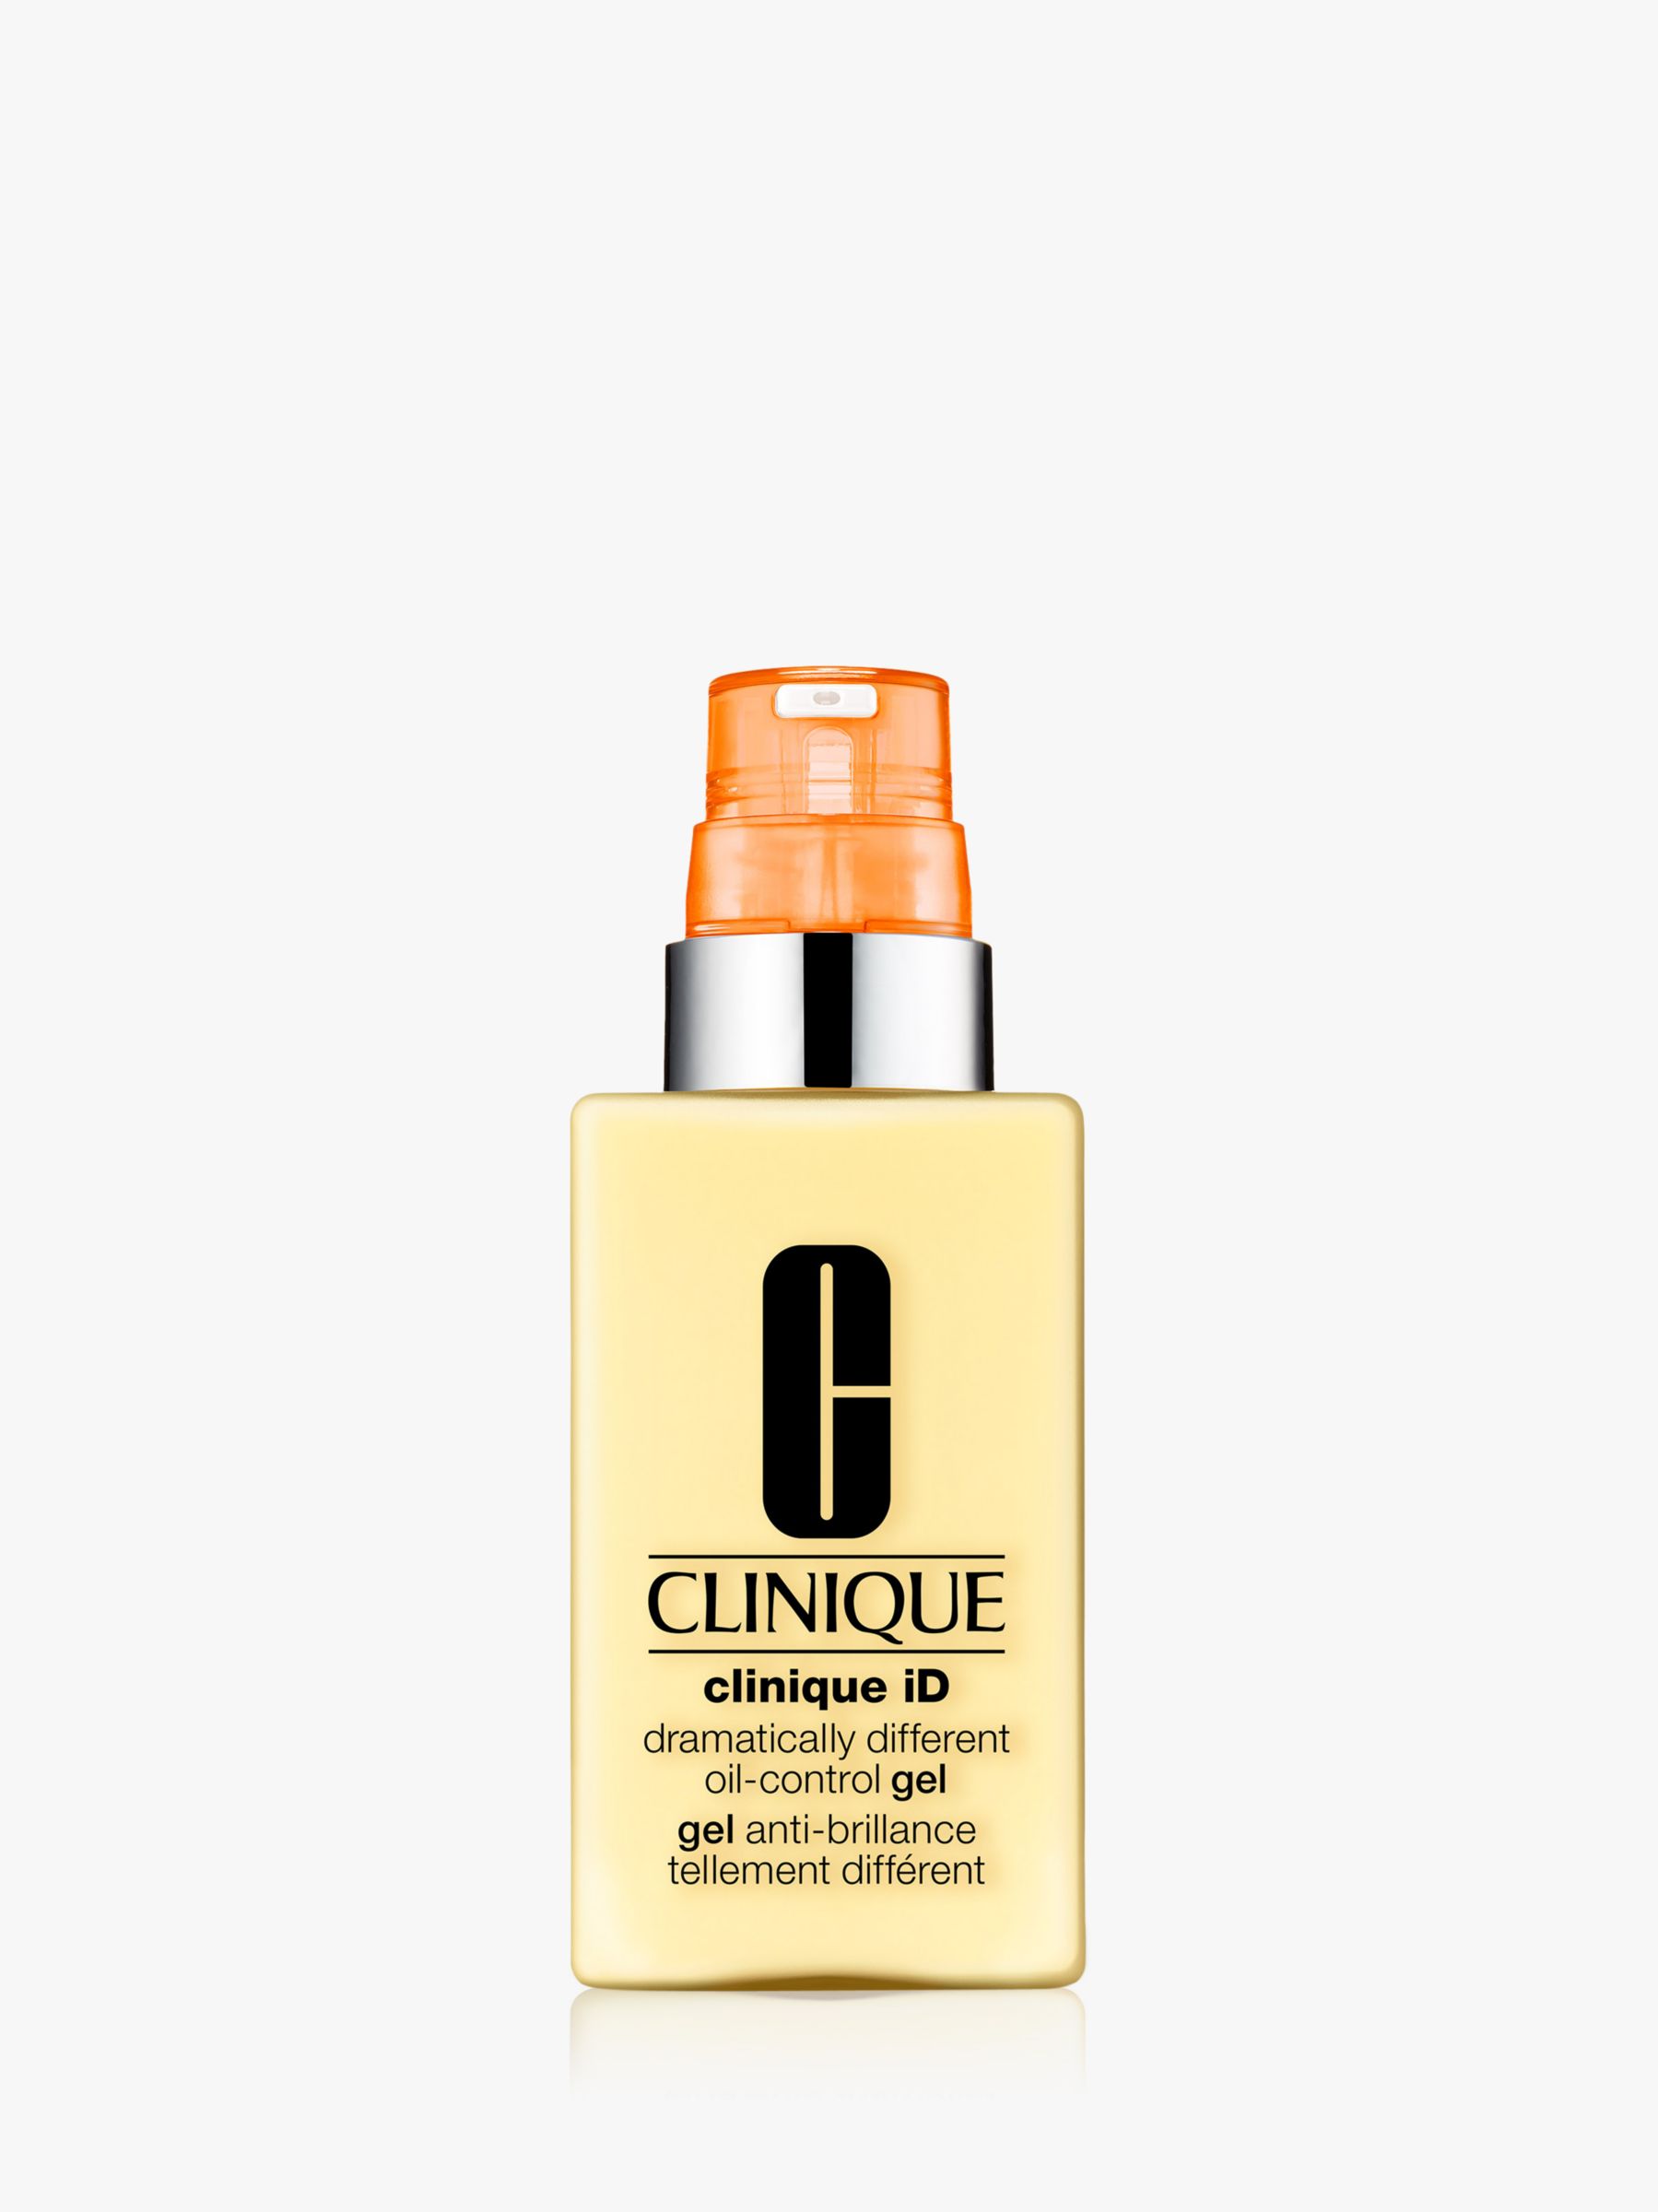 Clinique iD™: Dramatically Different™ Oil-Control Gel + Active Cartridge Concentrate, Fatigue